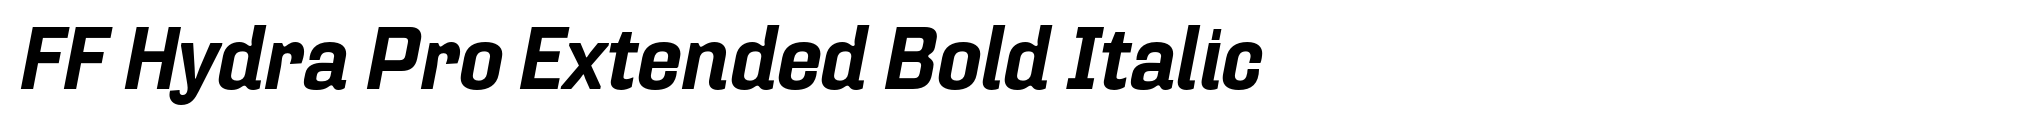 FF Hydra Pro Extended Bold Italic image